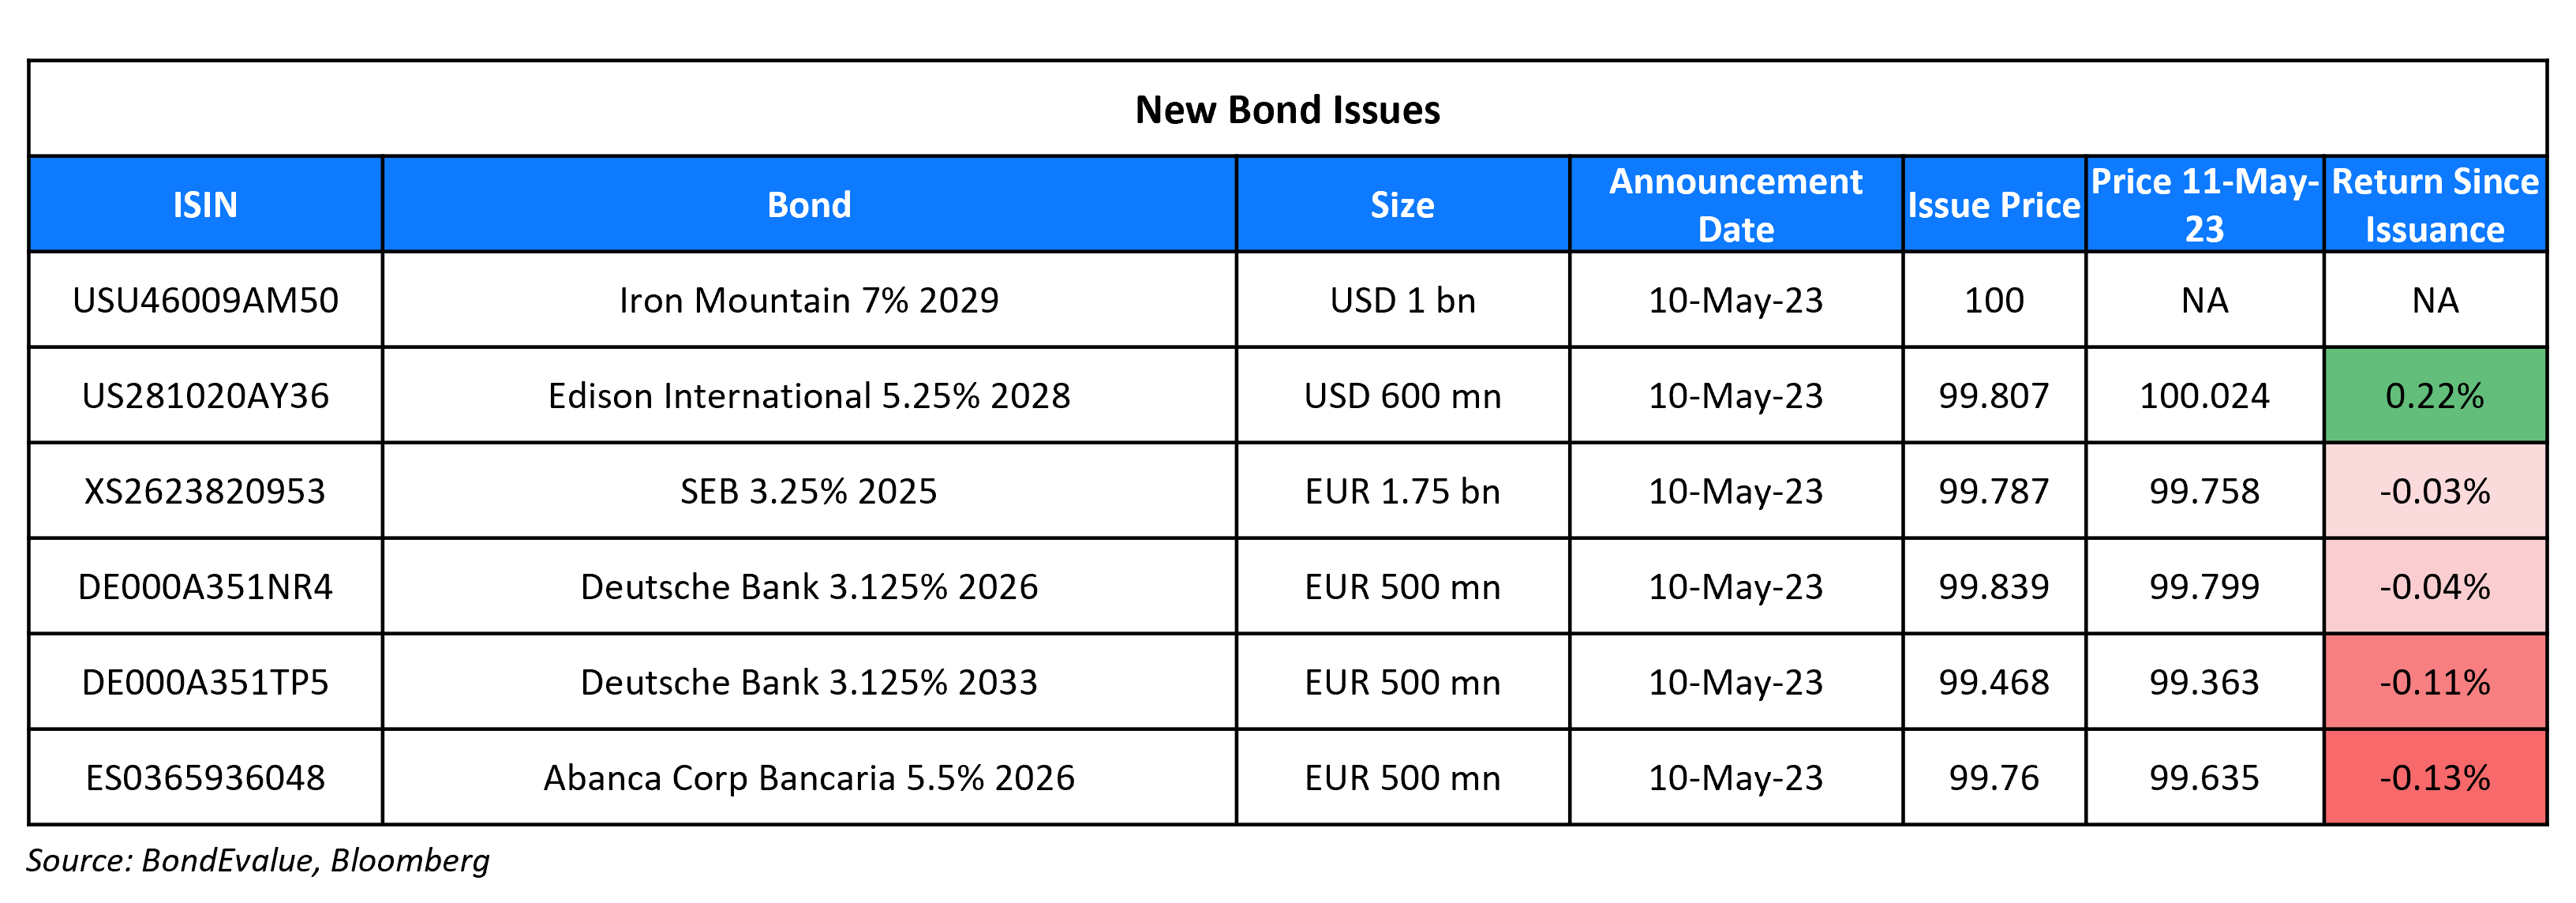 New Bond Issues 11 May 23